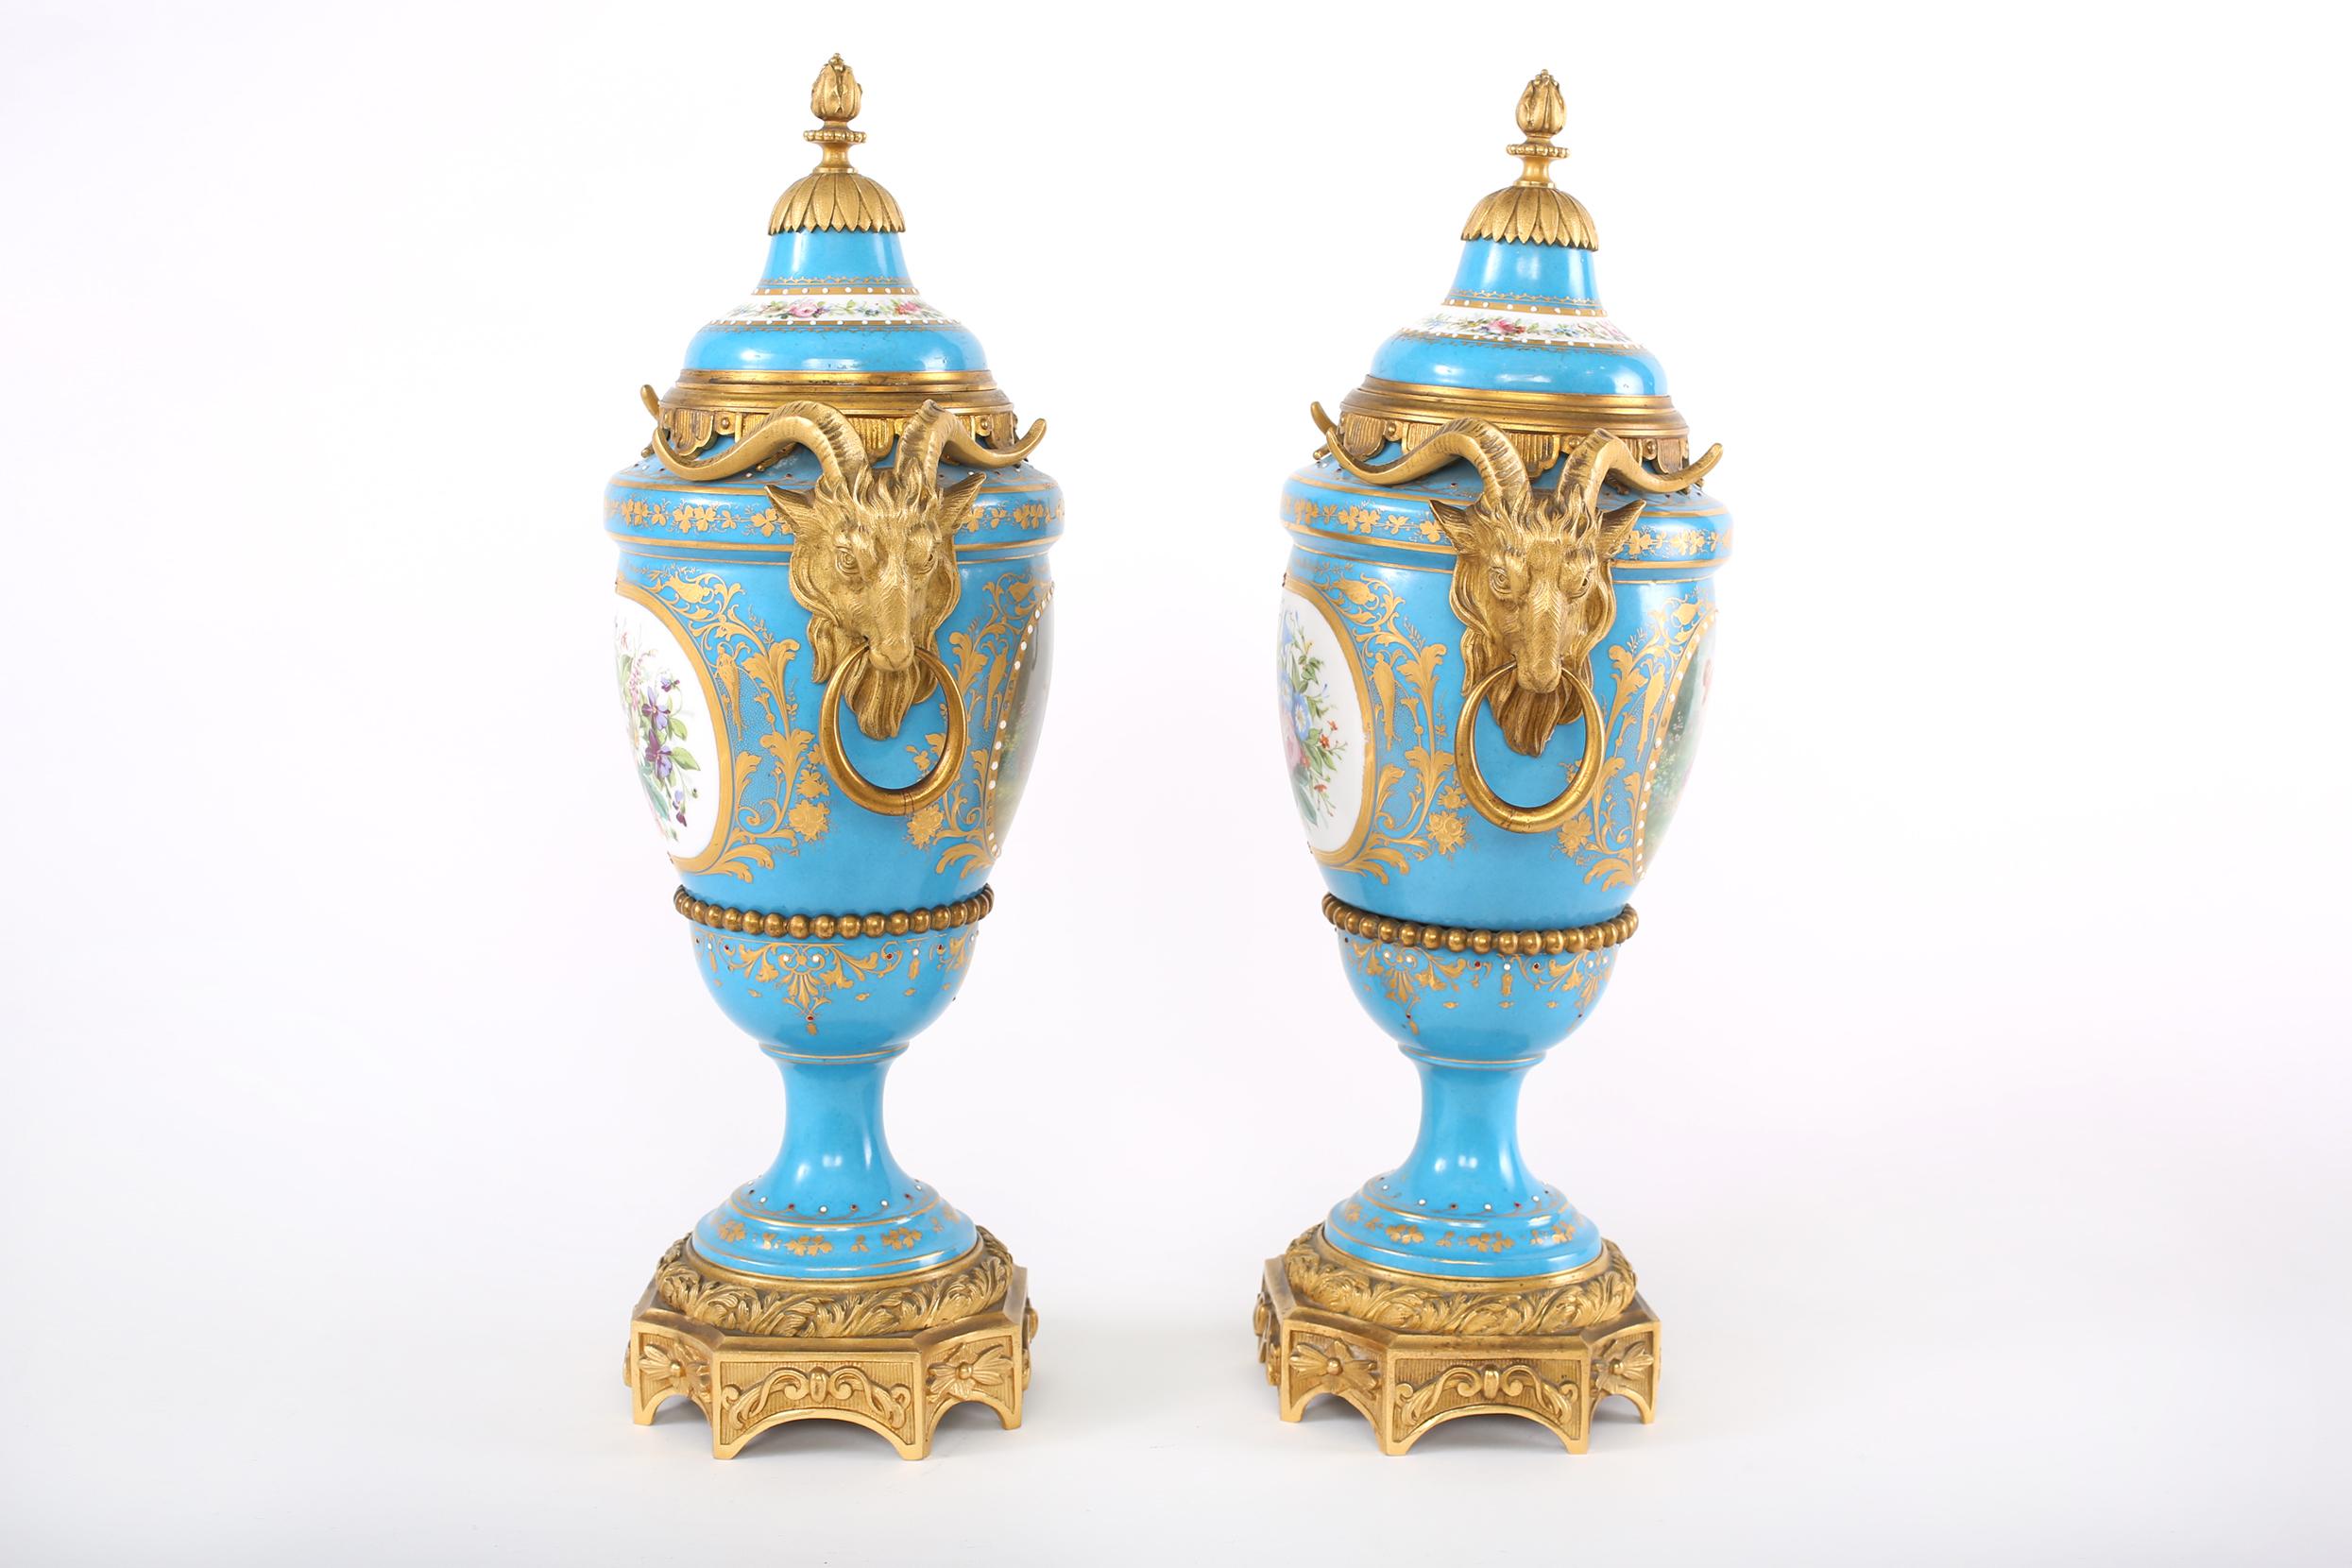 19th century French Sèvres-style porcelain gilt bronze mounted covered decorative urns / vases with gilt gold painted scene design details. Each urn is in good condition with wear consistent with age / use. Maker's mark undersigned. Each piece